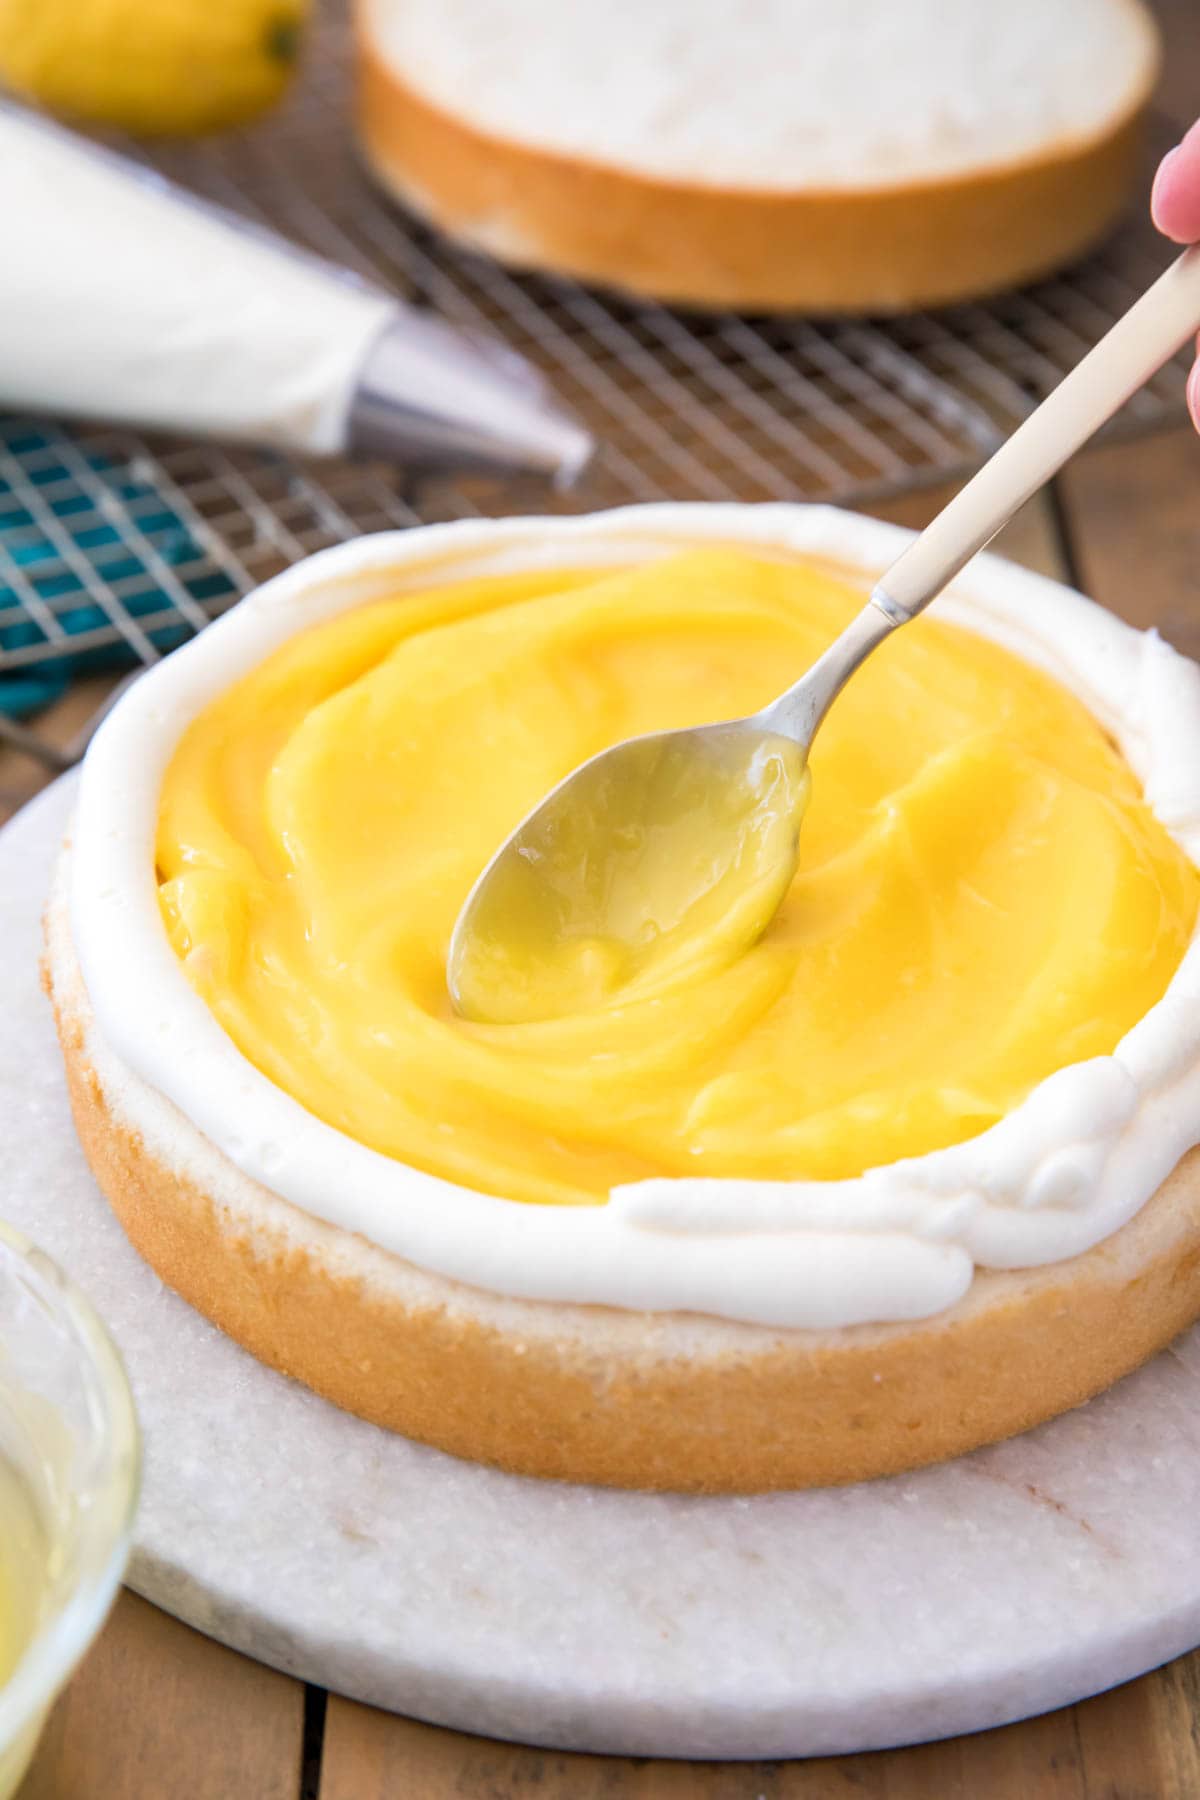 spoon spreading lemon curd onto a layer cake piped with a white icing dam